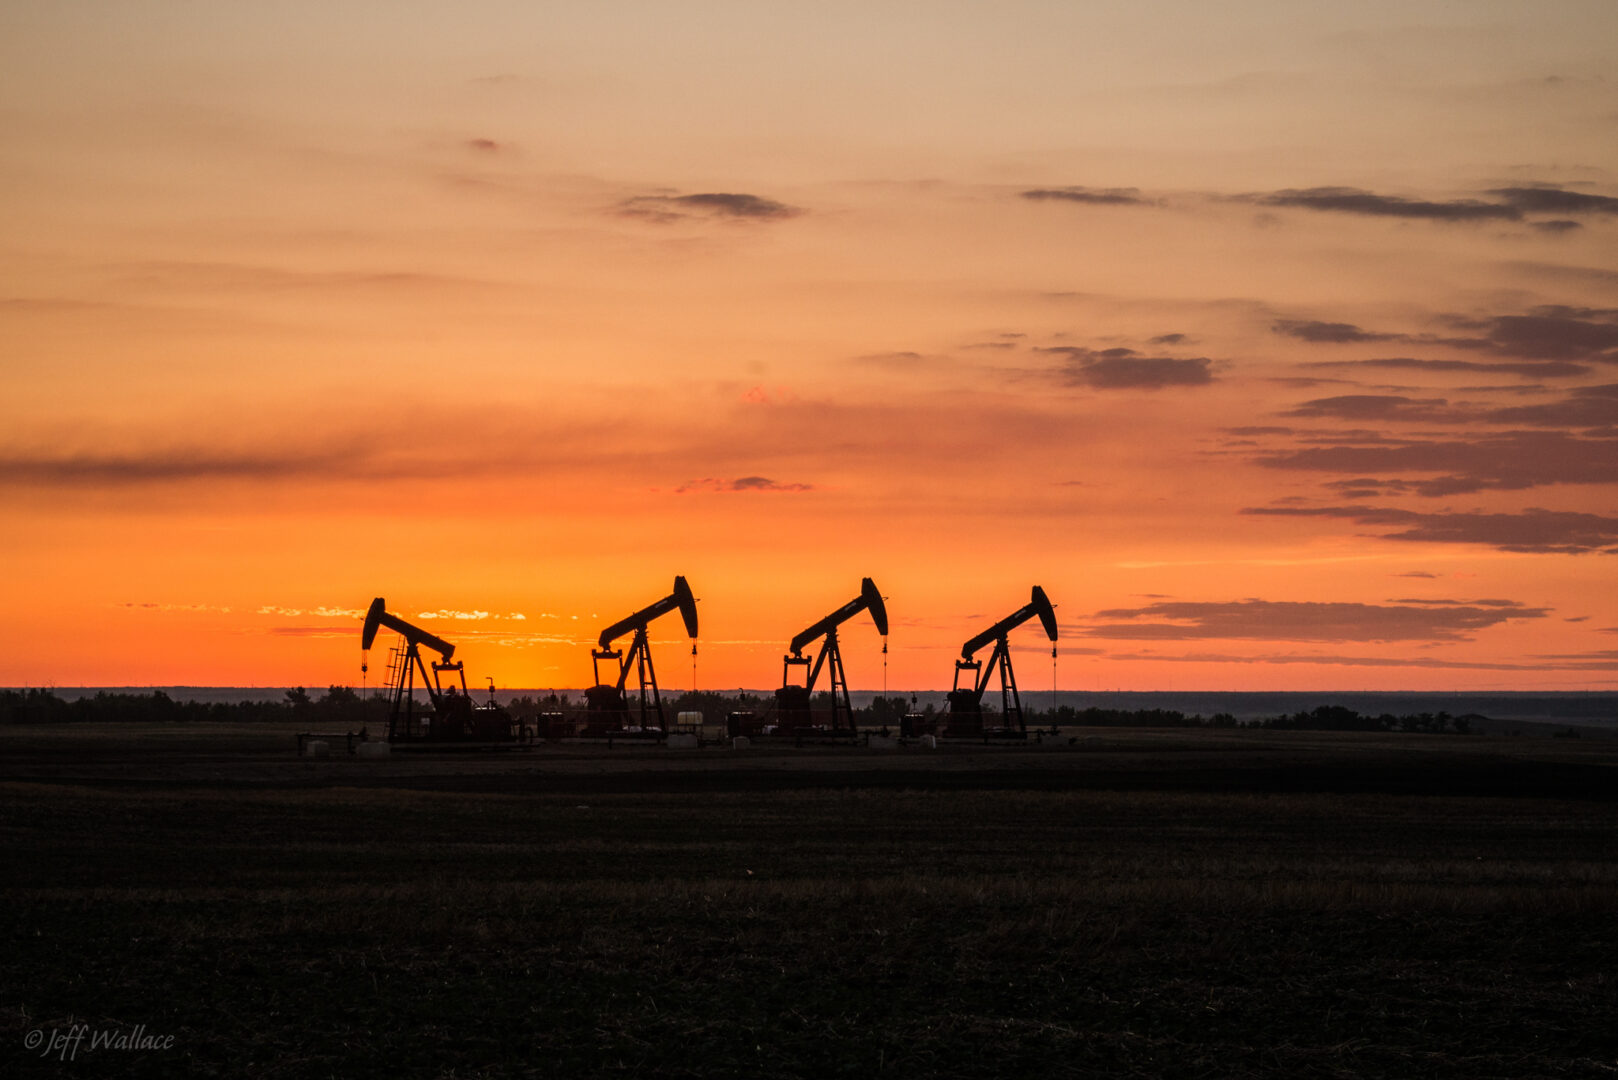 4 oil pumps are placed on the dark ground. The sun sets in the background silhouetting the pumps.